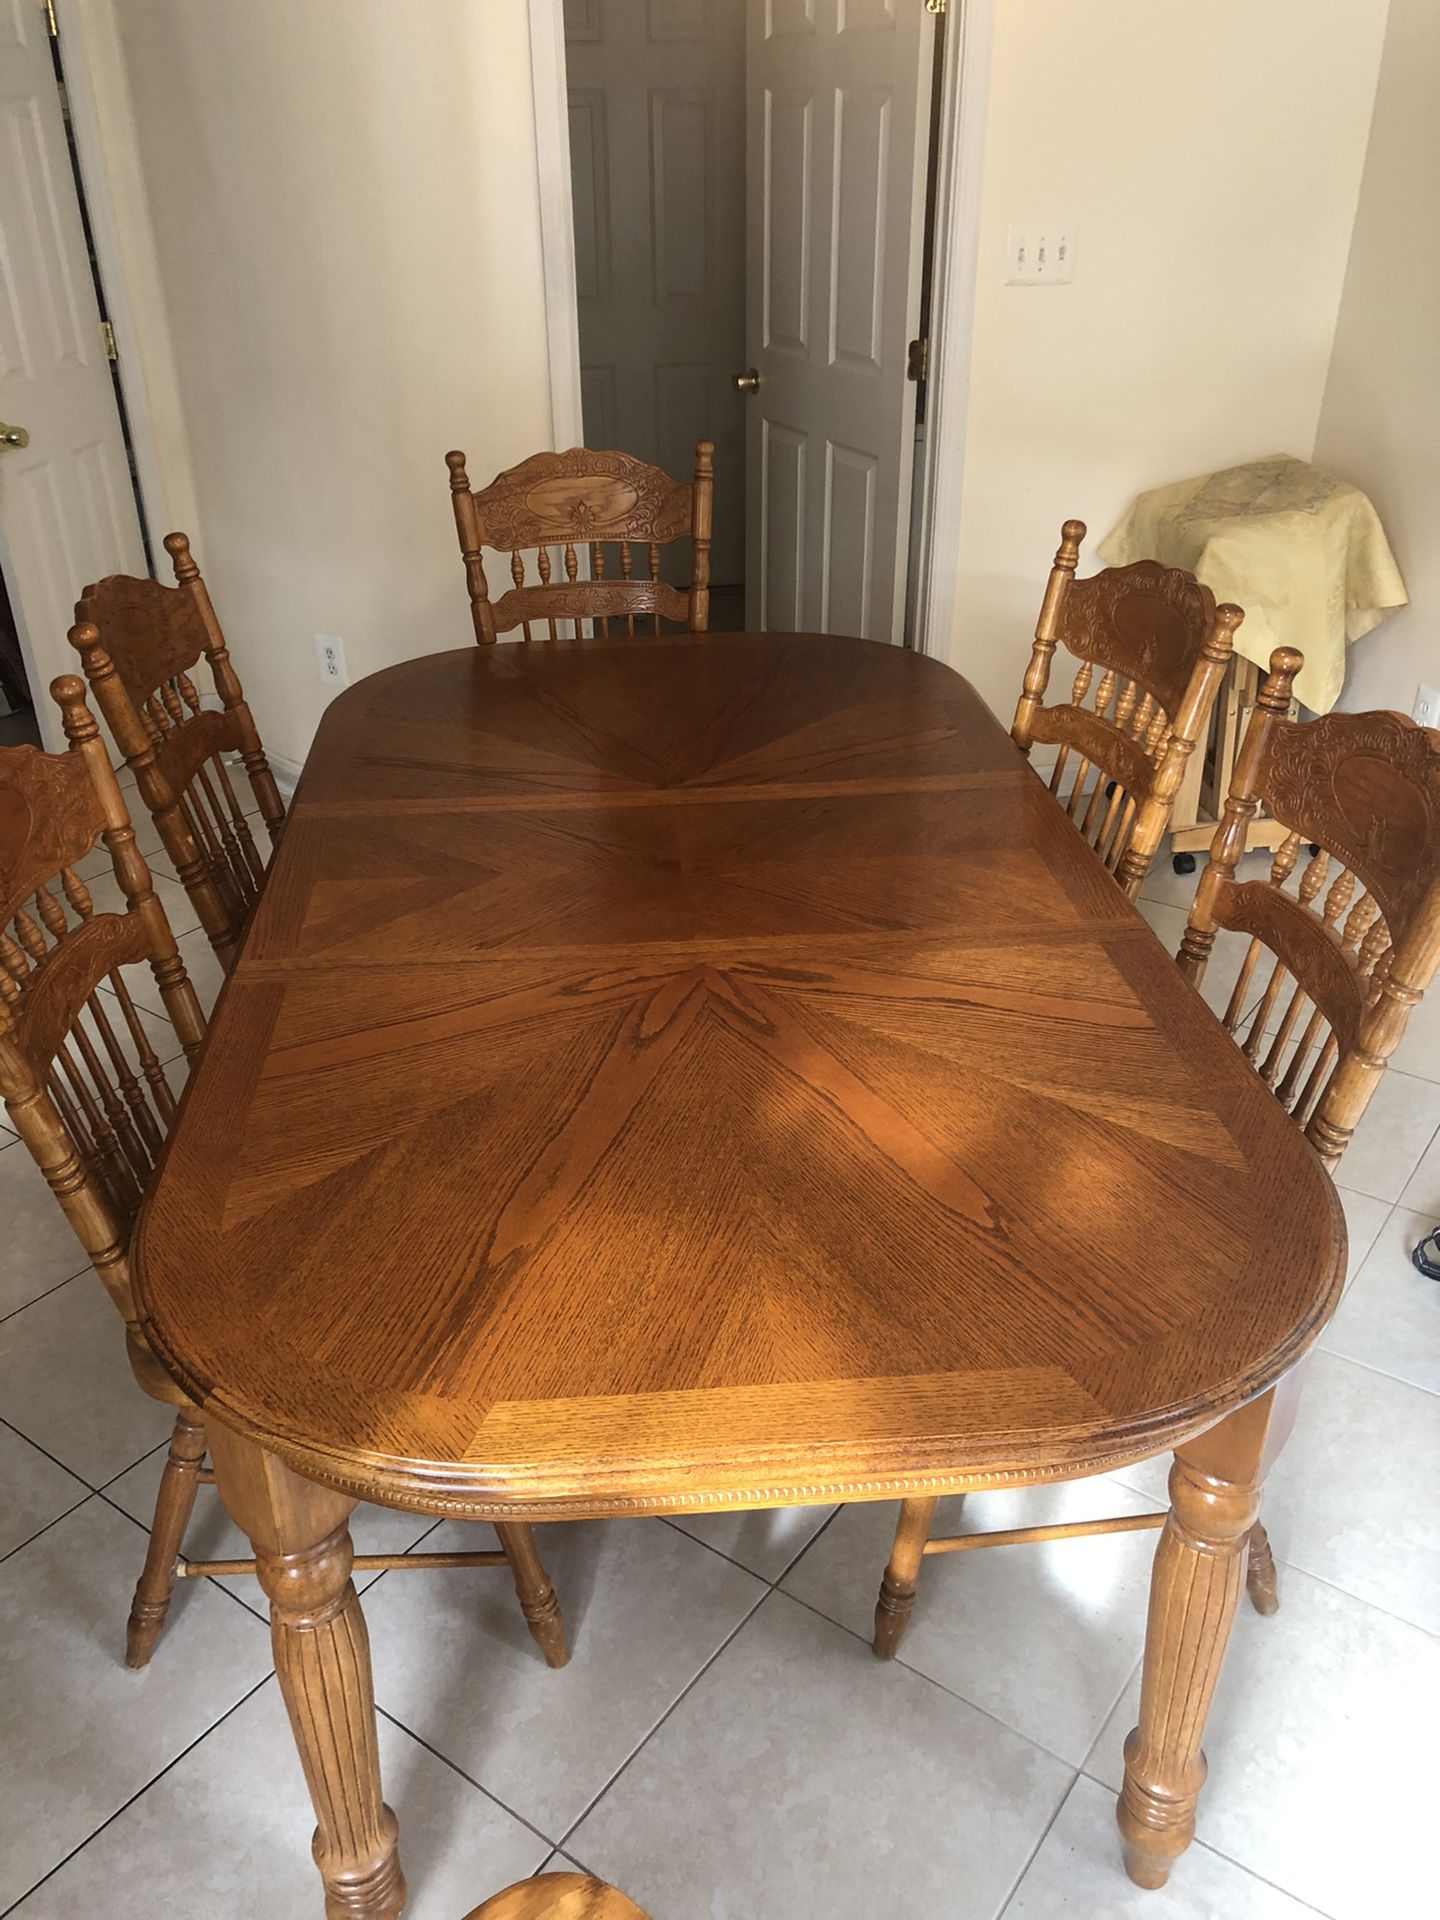 Kitchen table with 6 Chairs and 2 Counter chairs